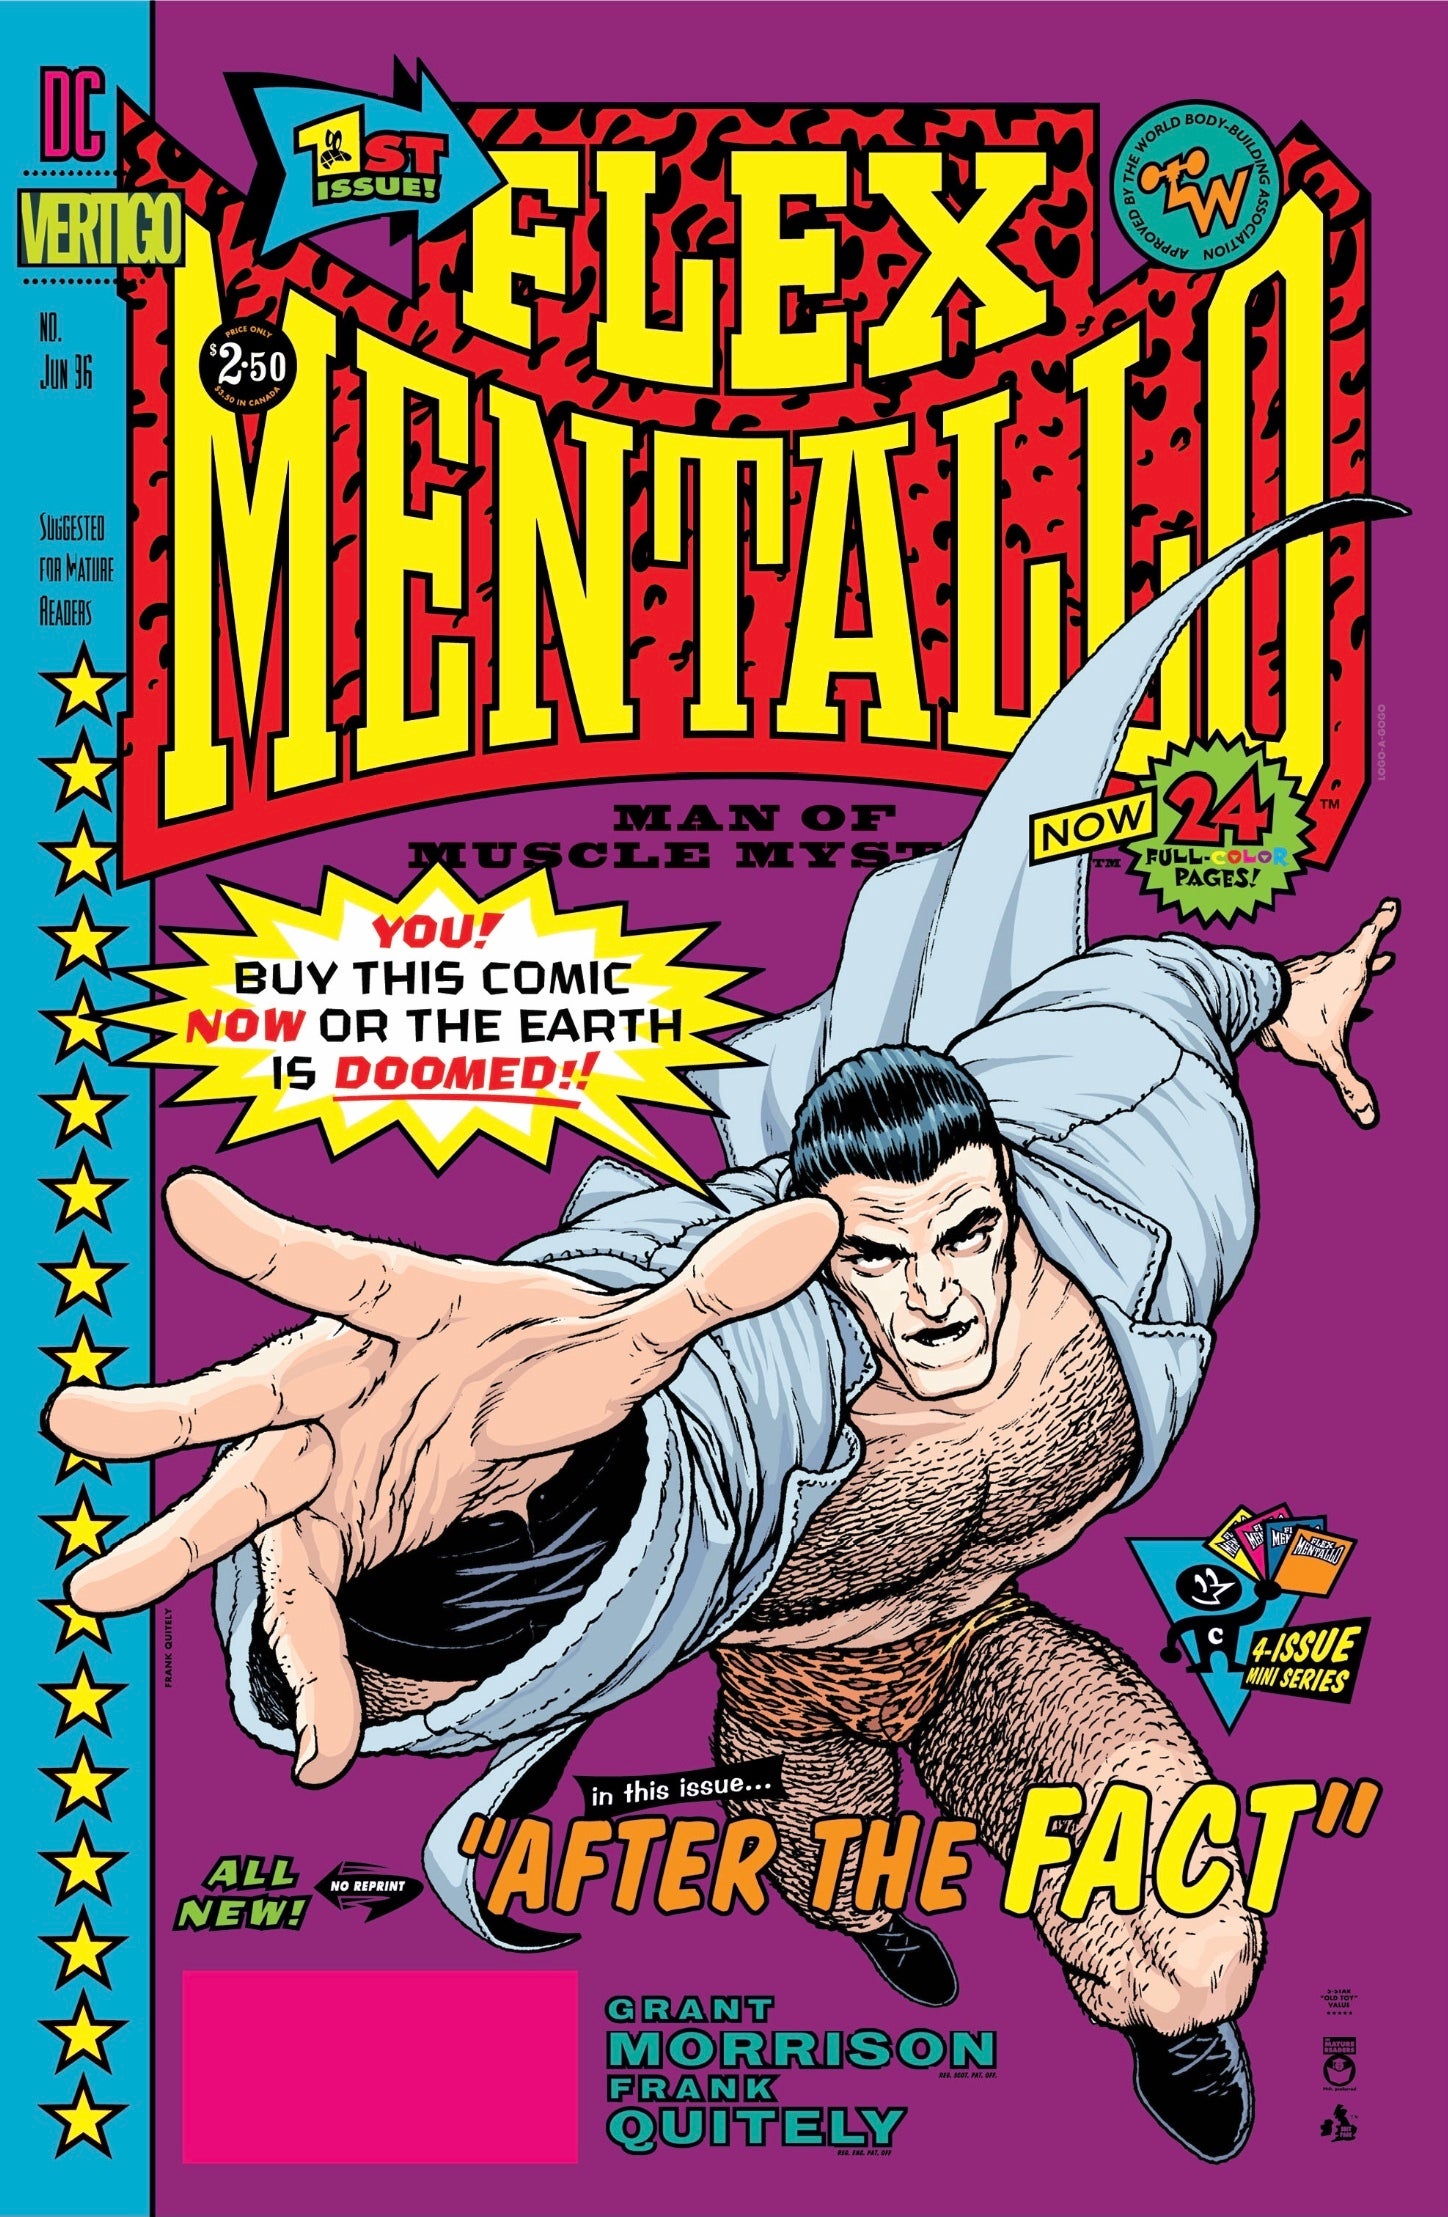 DC Comics. Flex Mentallo issue 1 cover, featuring Flex Mentallo reaching out towards the reader